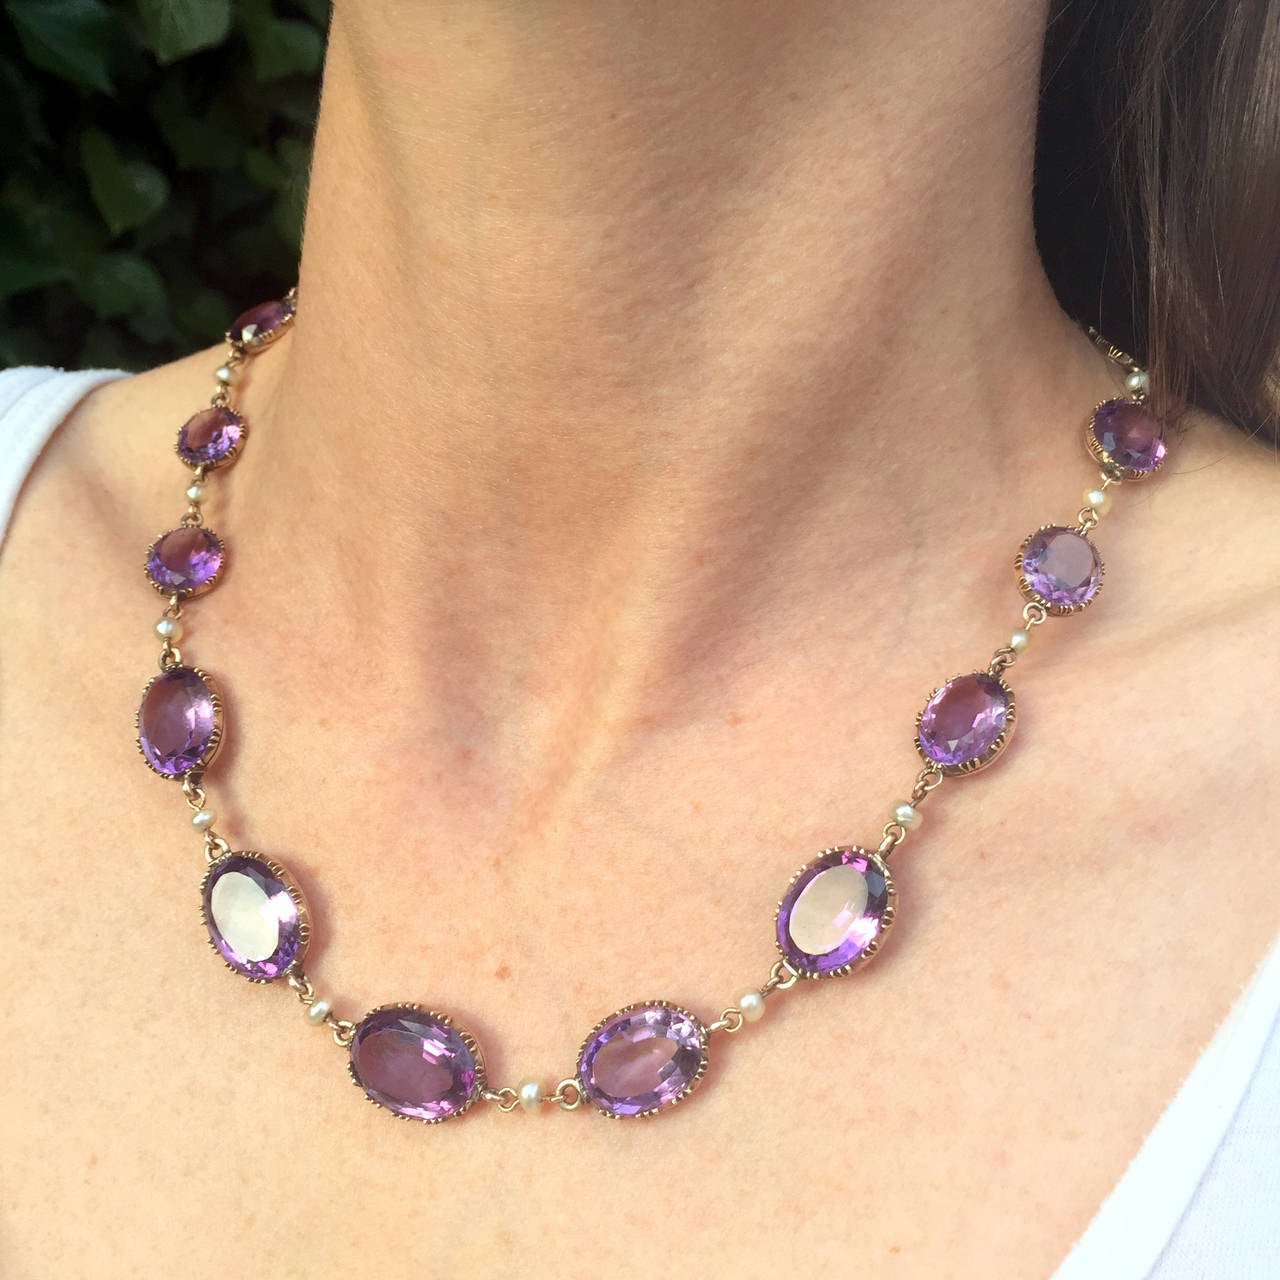 A fine and elegant Victorian riviere necklace, with 19 horizontally set oval cut natural amethysts in an open backed cutdown claw setting, allowing maximum light into these glowing purple stones. The articulated links are each hold a natural seed